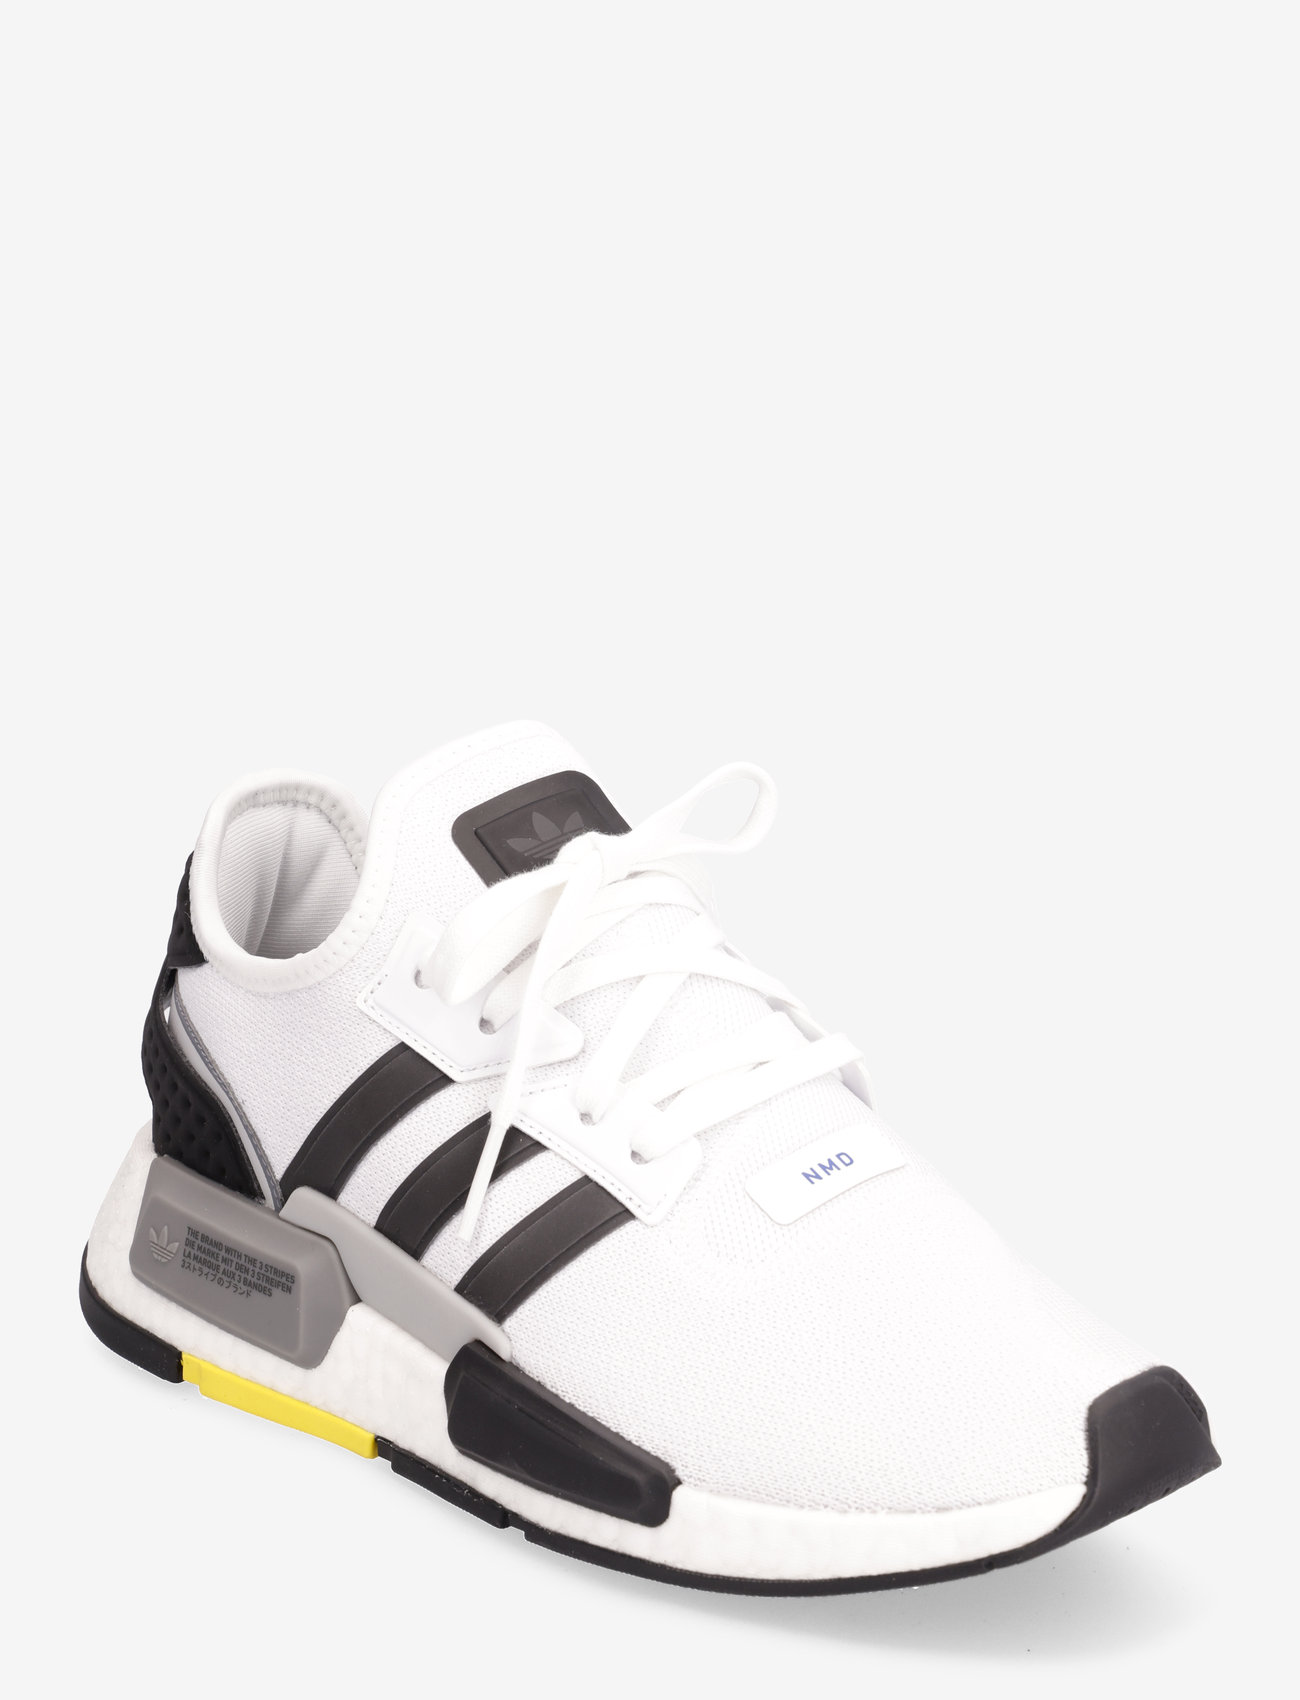 adidas Originals - NMD_G1 Shoes - lave sneakers - ftwwht/cblack/gresix - 0